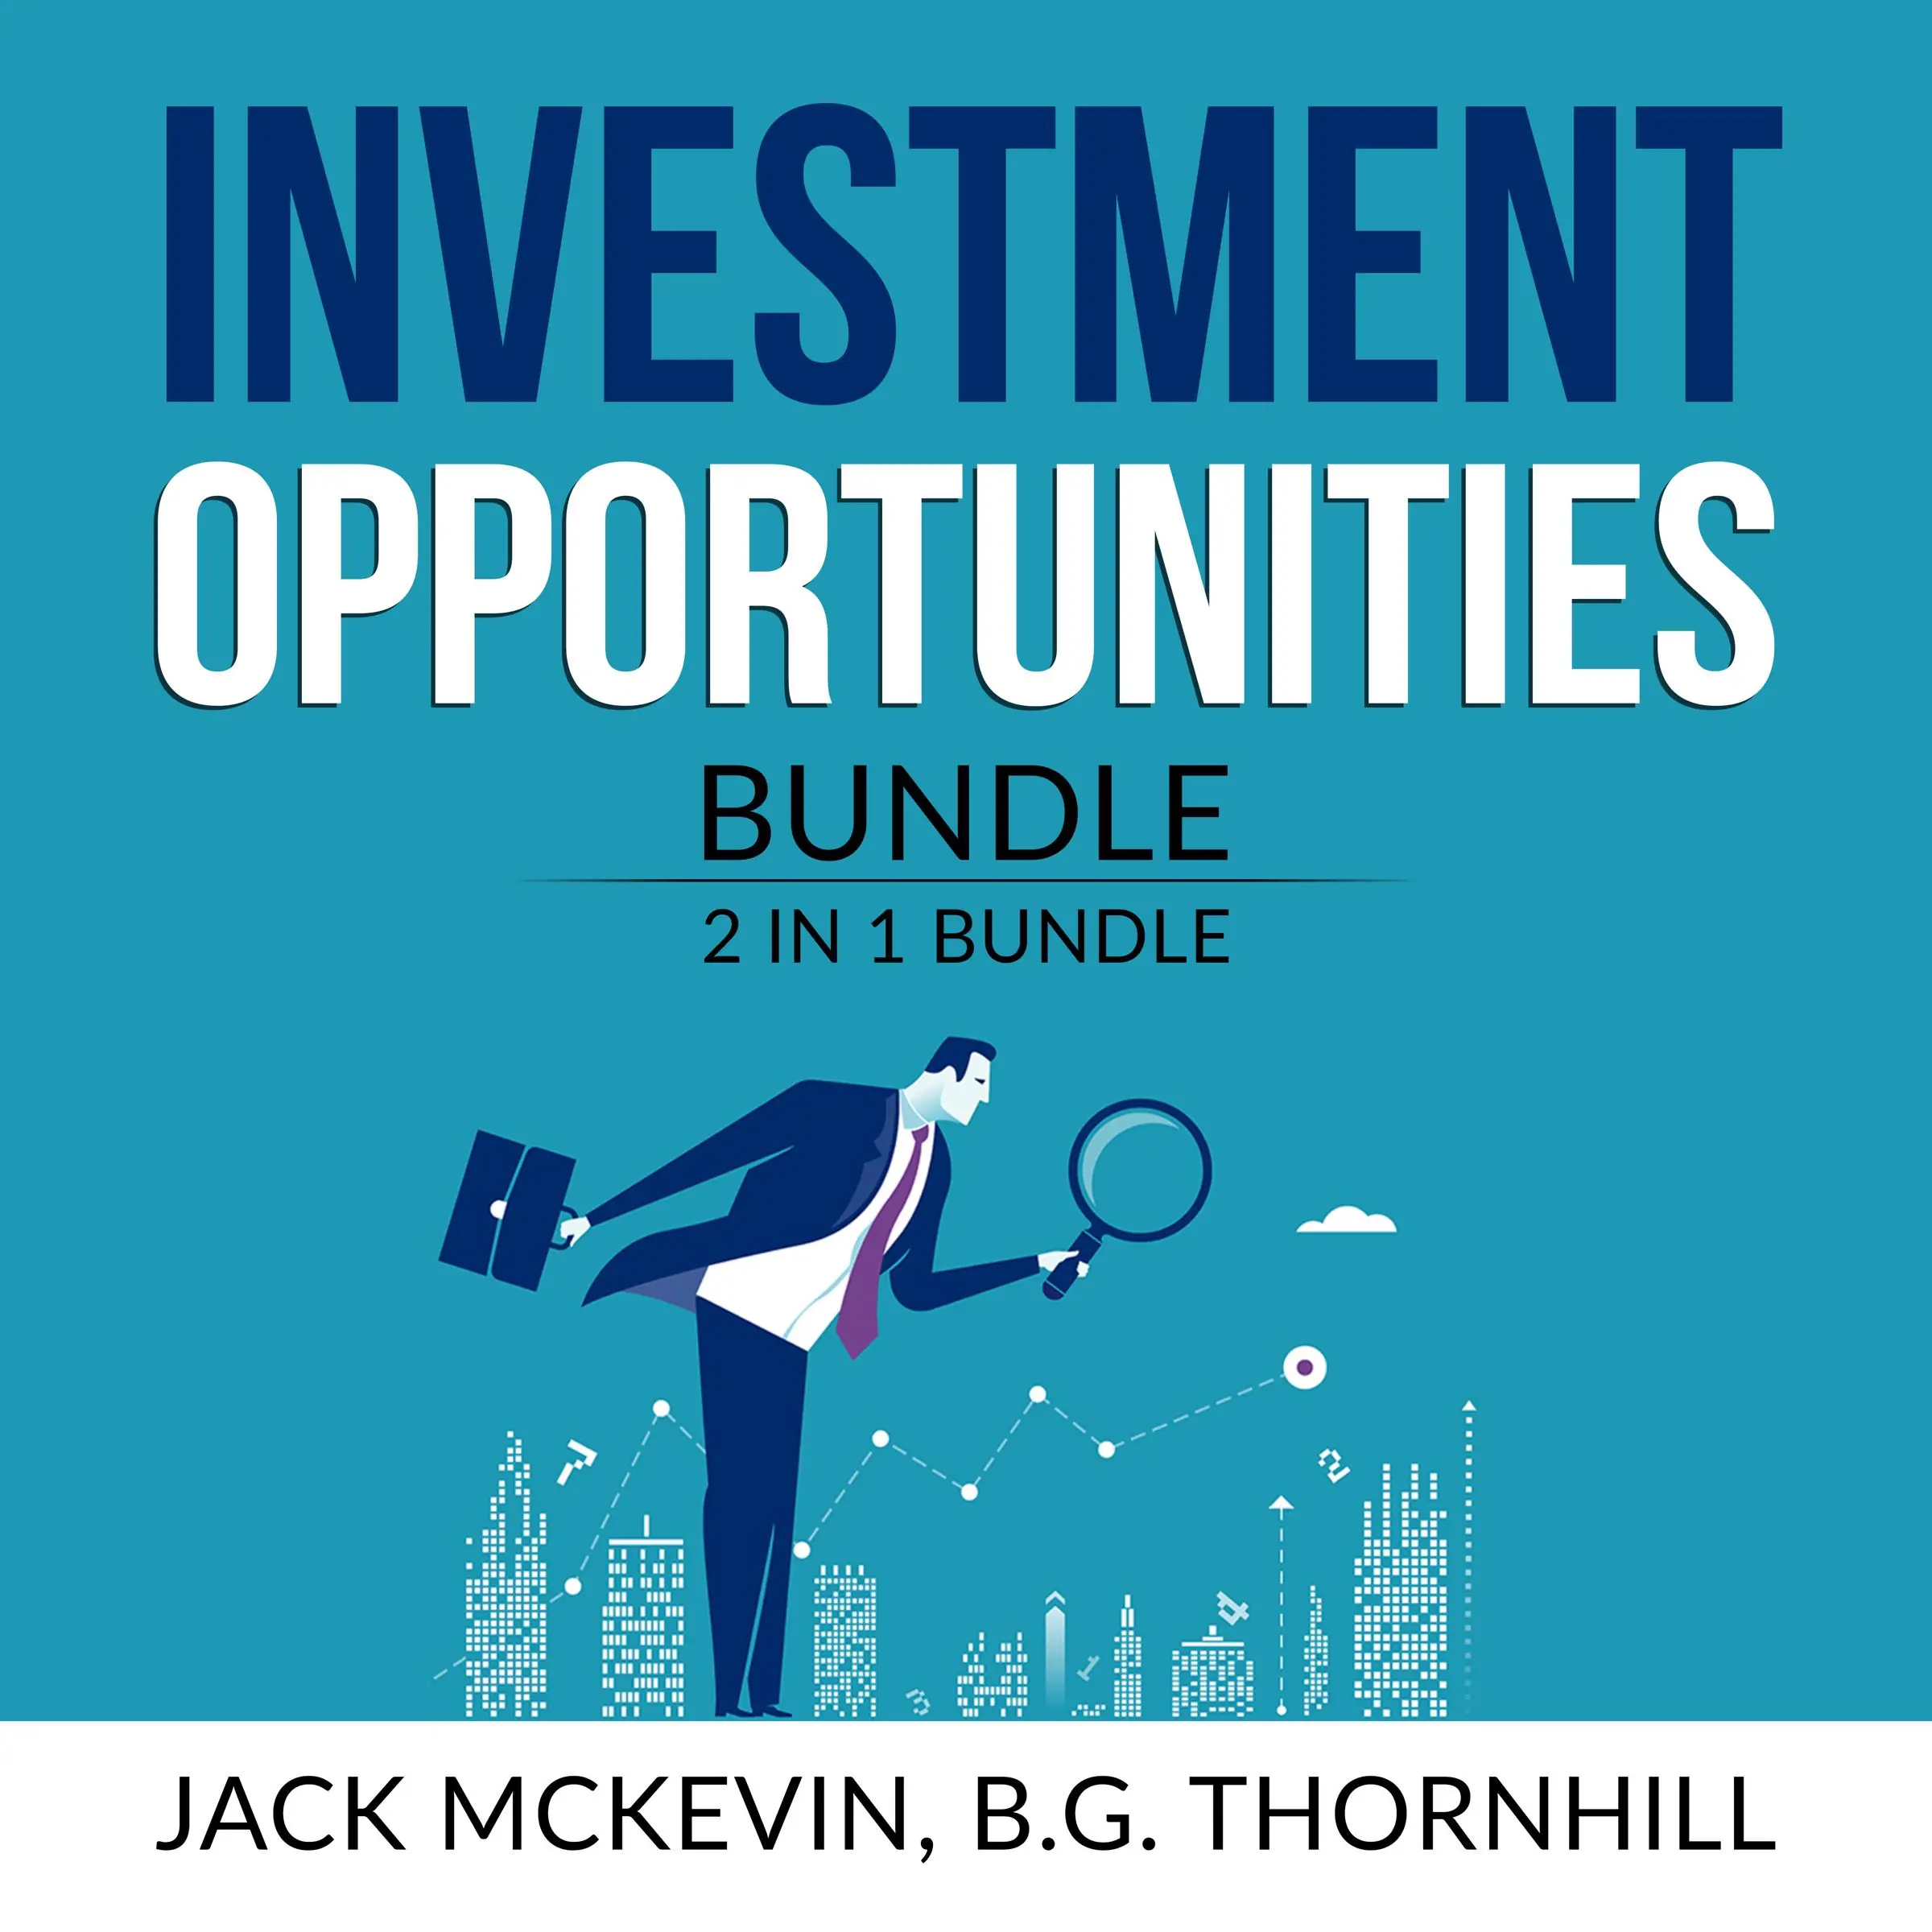 Investment Opportunities Bundle: 2 in 1 Bundle, Make Money in Stocks and Manage Your Properties by B.G Thornhill Audiobook